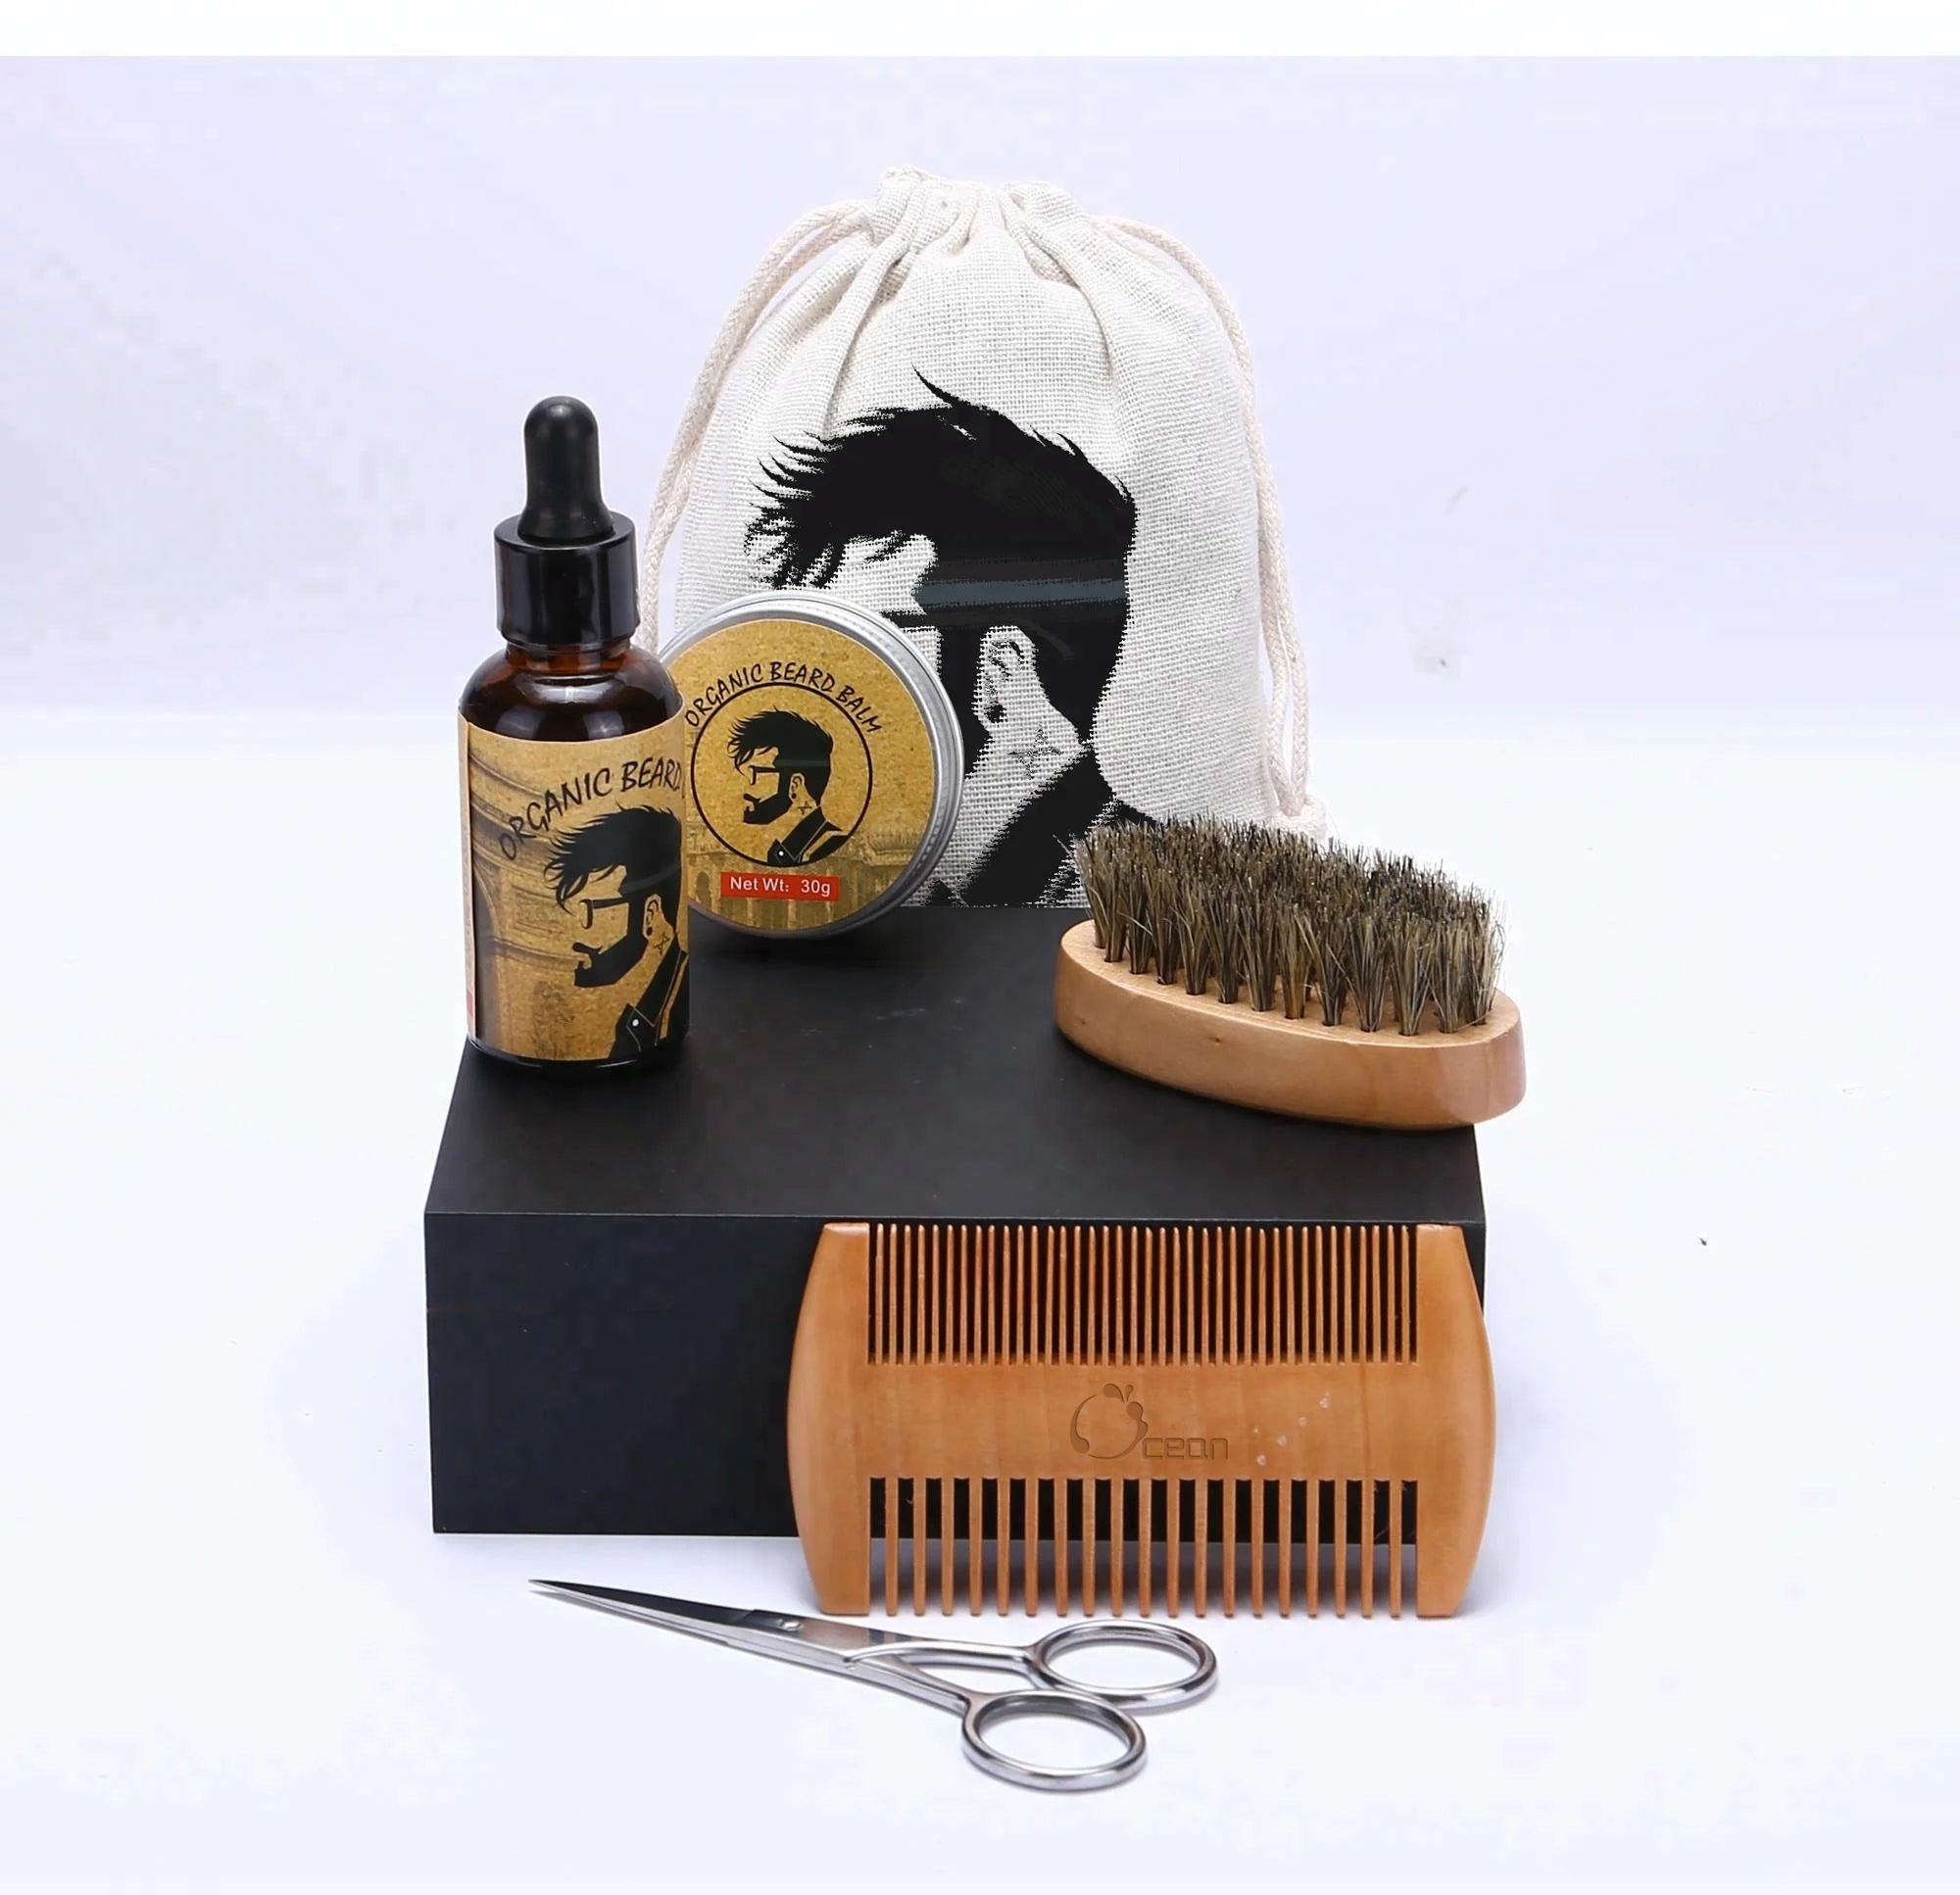 Does a Wooden Beard Comb Really Make a Difference?